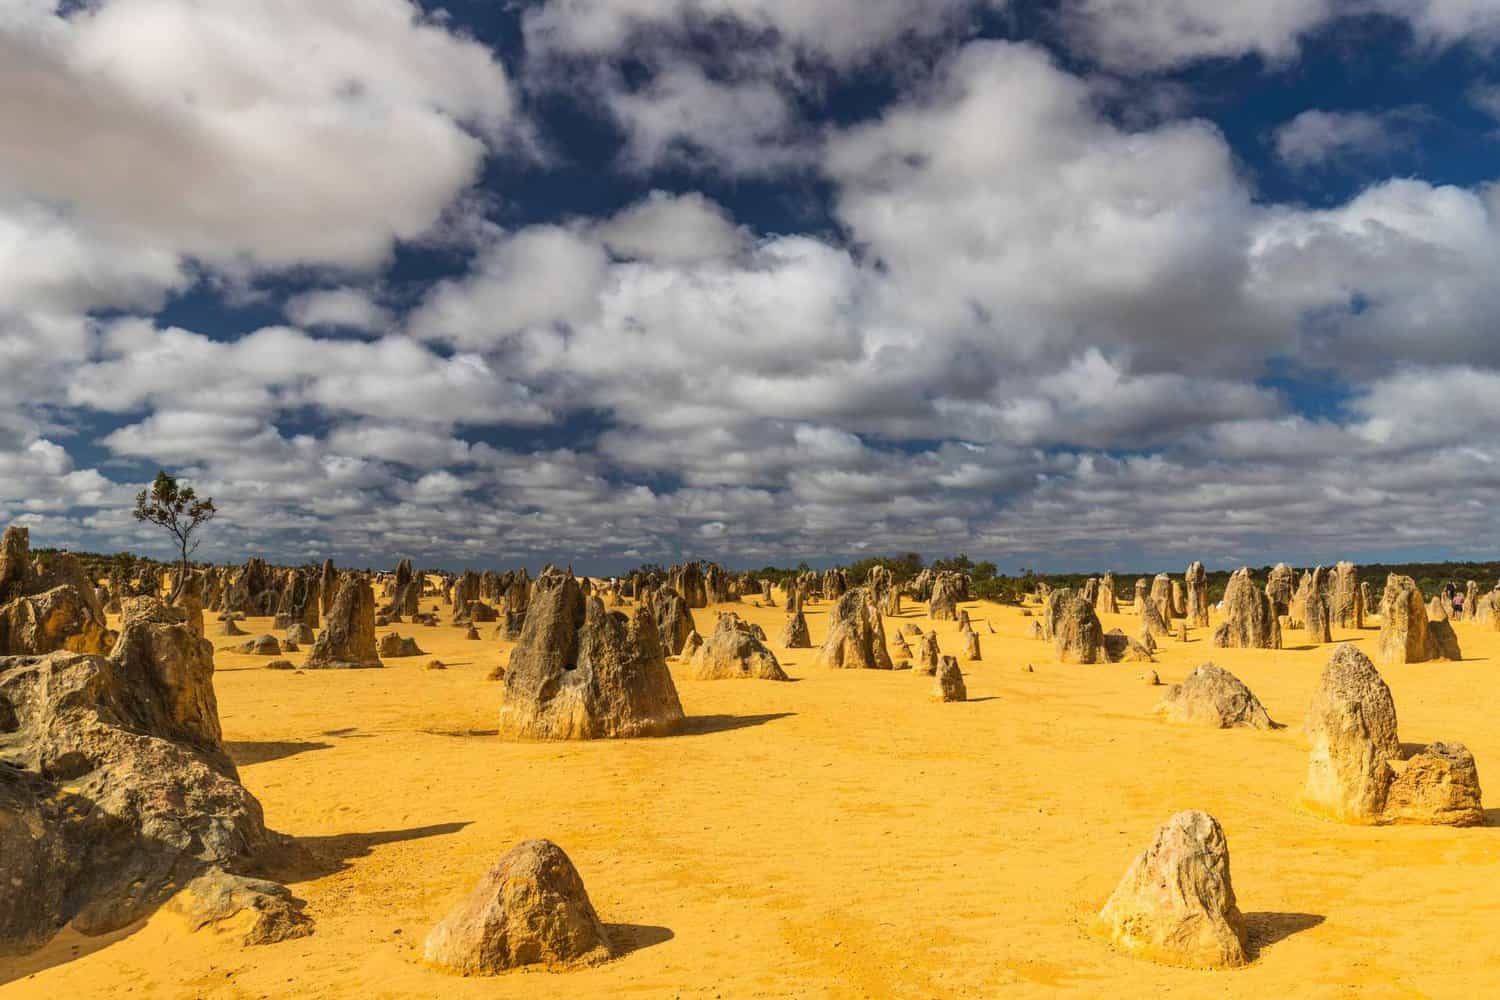 Breathtaking view of the Pinnacles Desert on the Perth to Exmouth journey, featuring unique limestone formations under a dramatic cloudy sky, showcasing the region's natural wonders